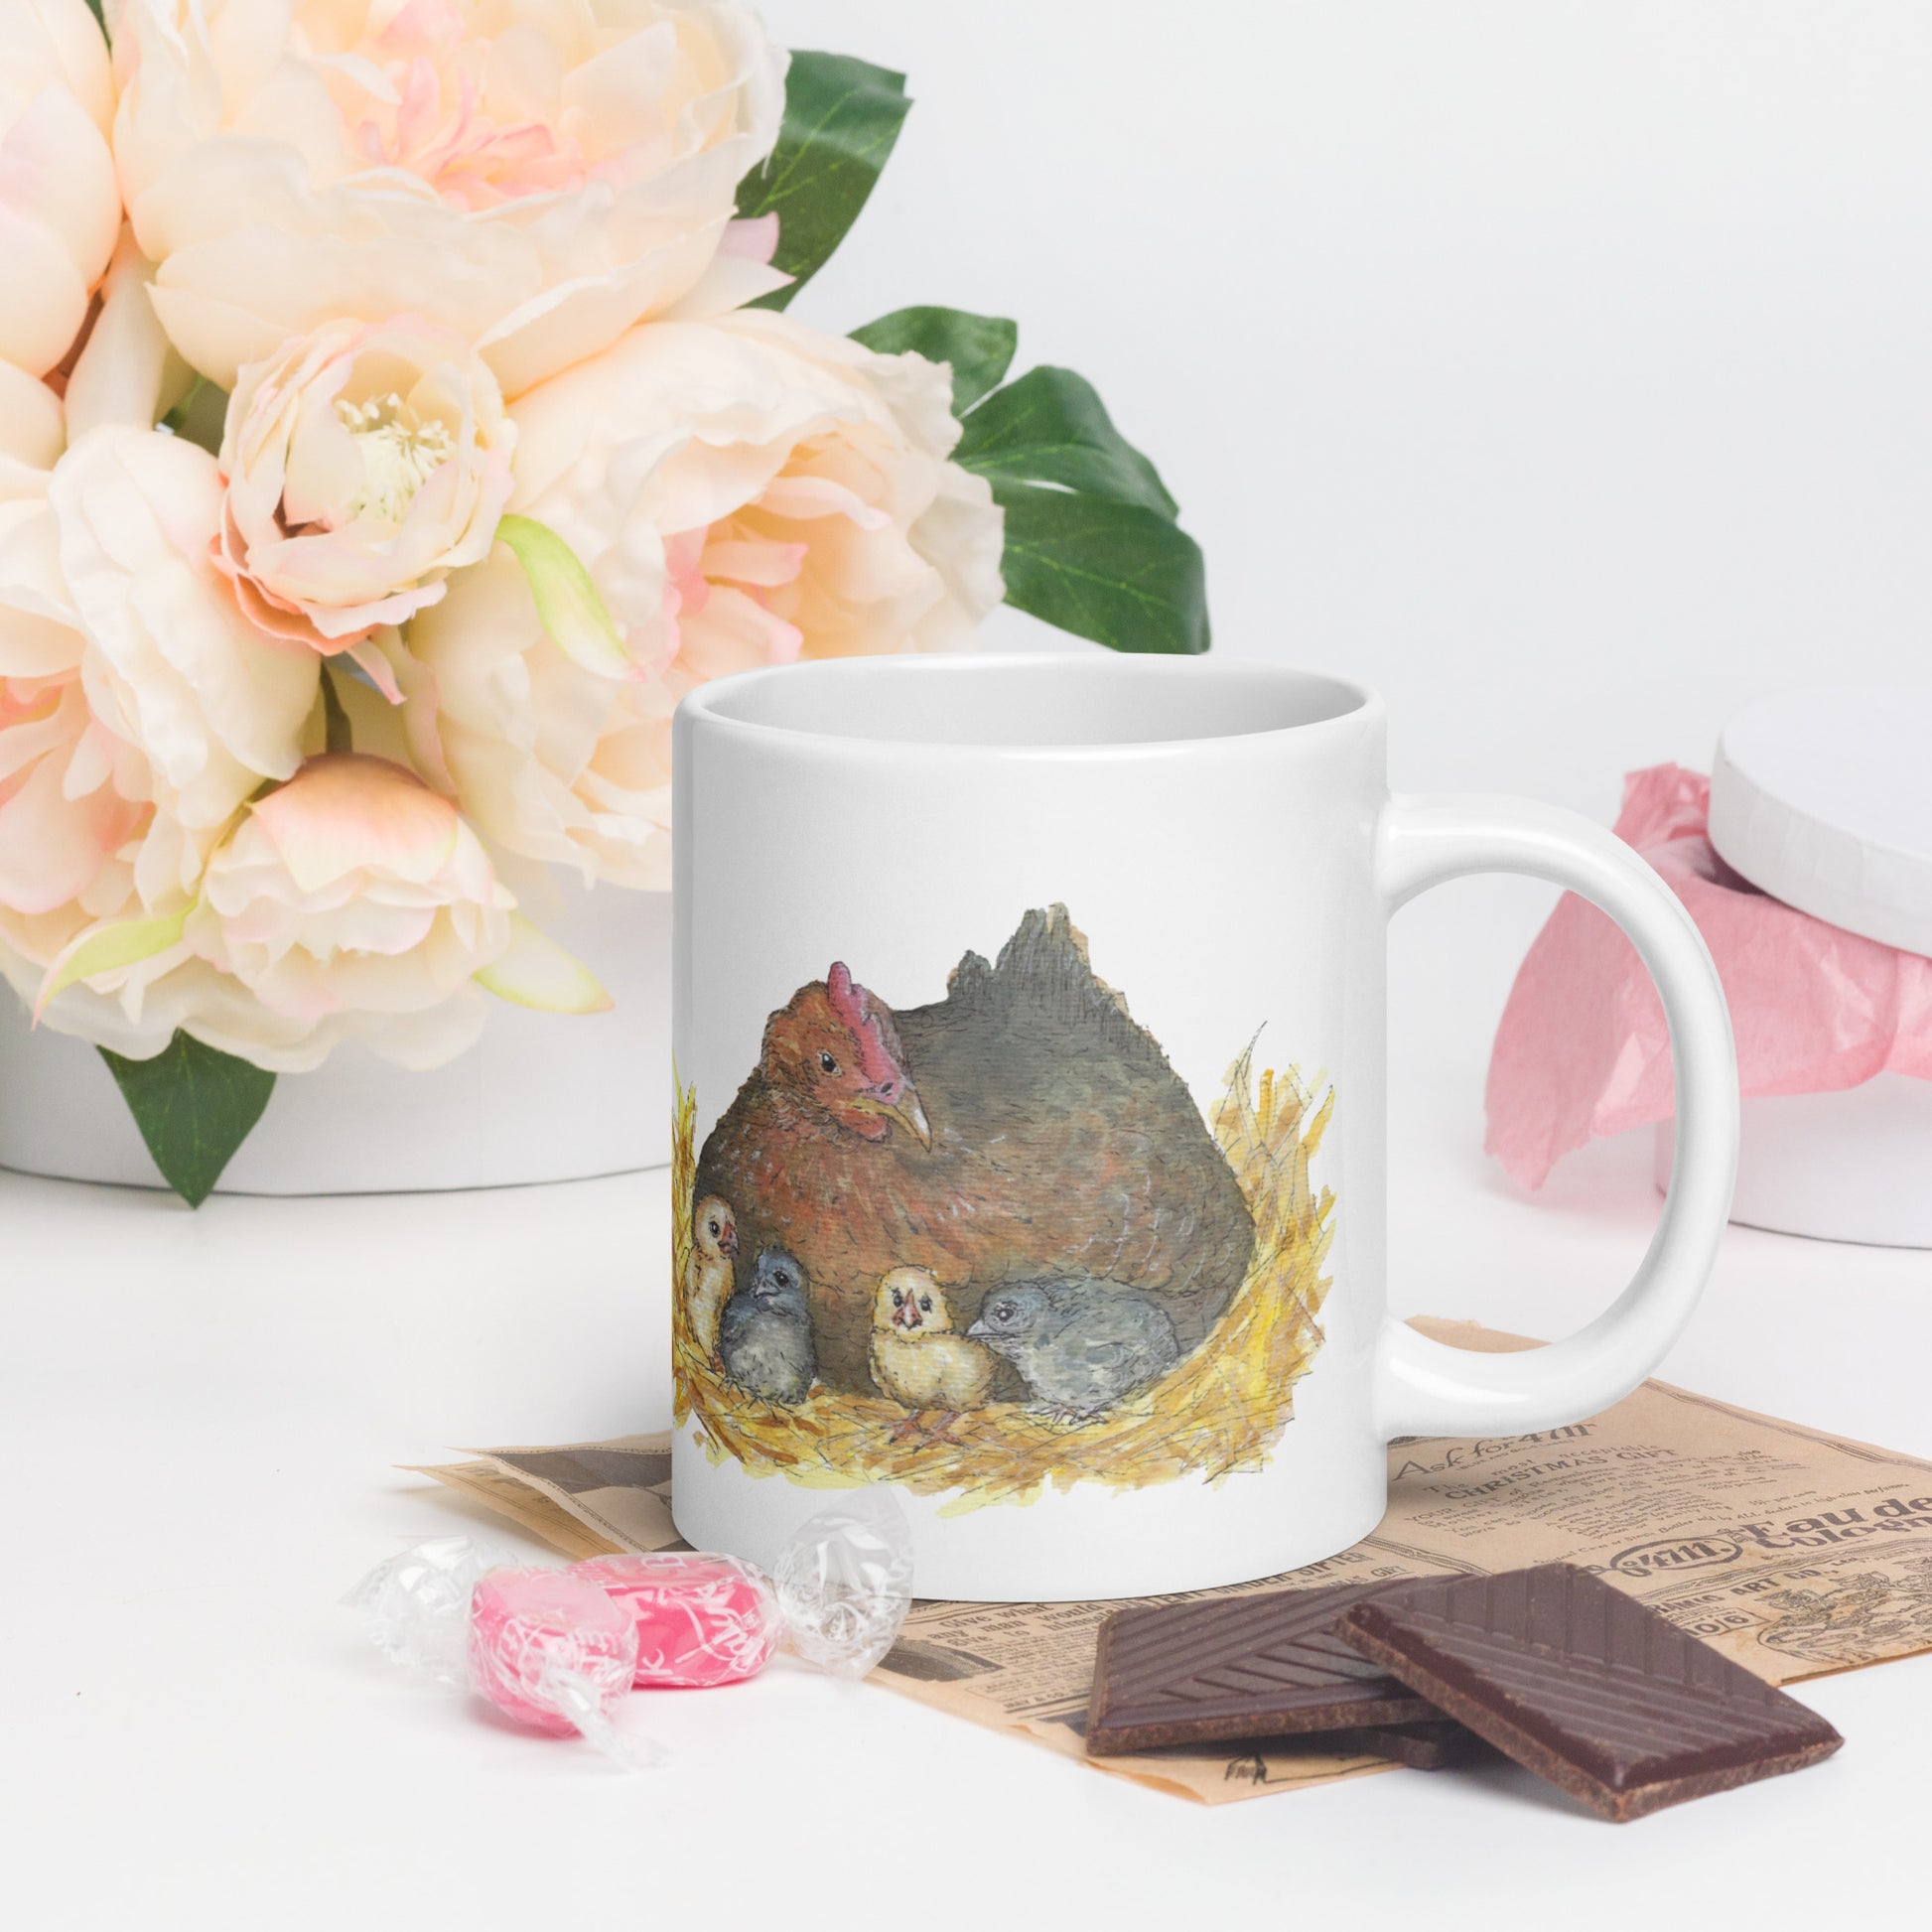 20 ounce white ceramic chicken whisperer mug. Features print of watercolor mother hen and chicks on one side and chicken whisperer text on the other. Dishwasher and microwave safe. Shown on table by chocolate and flowers with handle facing right.